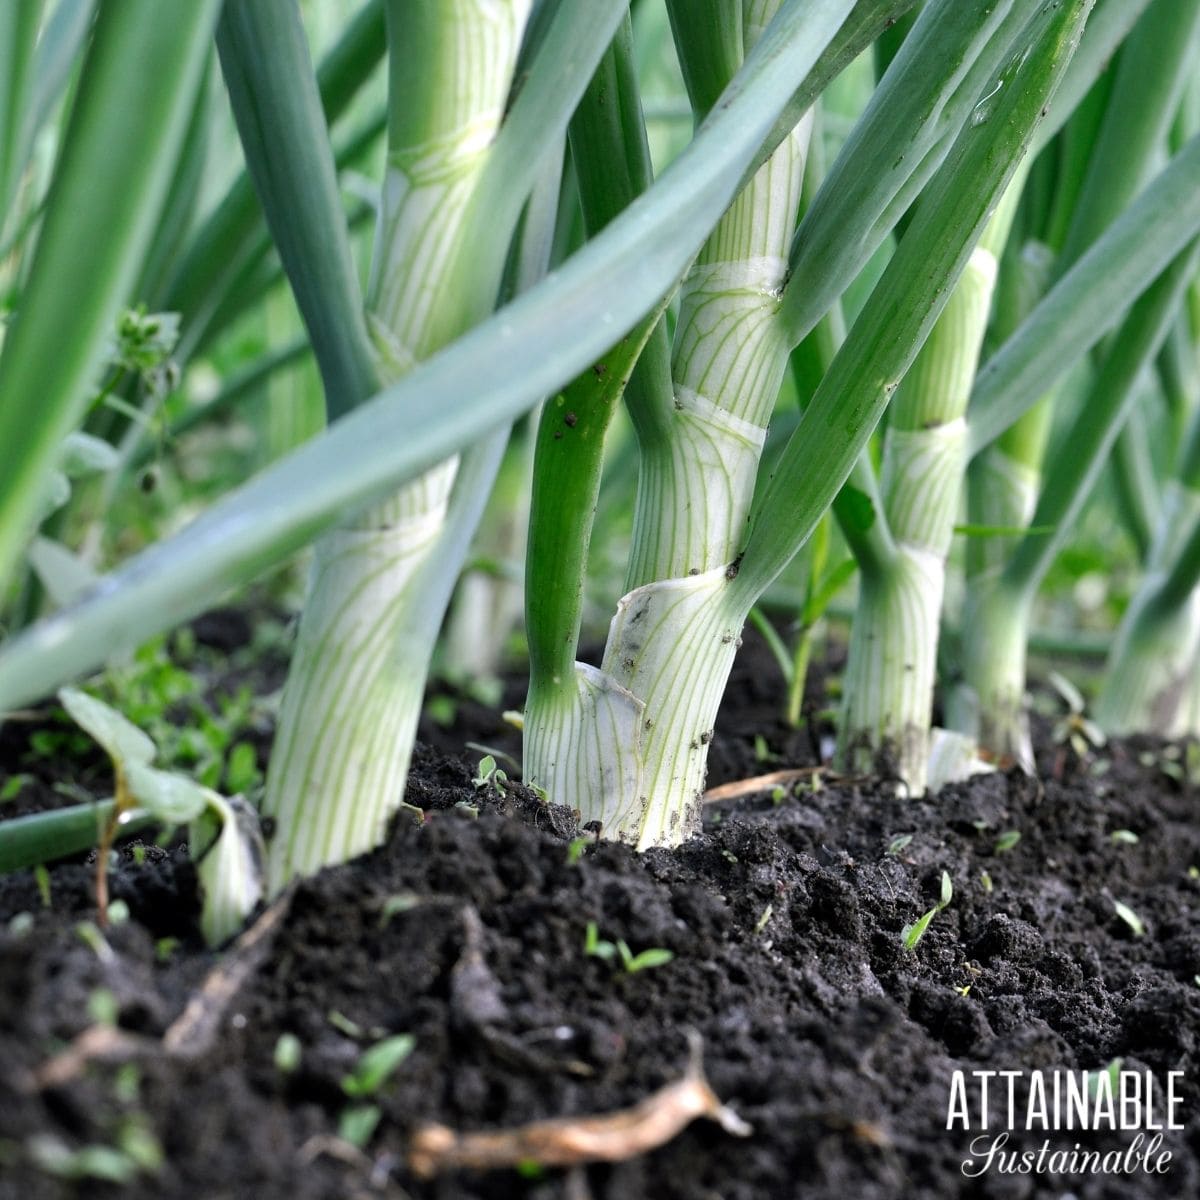 Close up of green onions growing, showing the long white stalks.